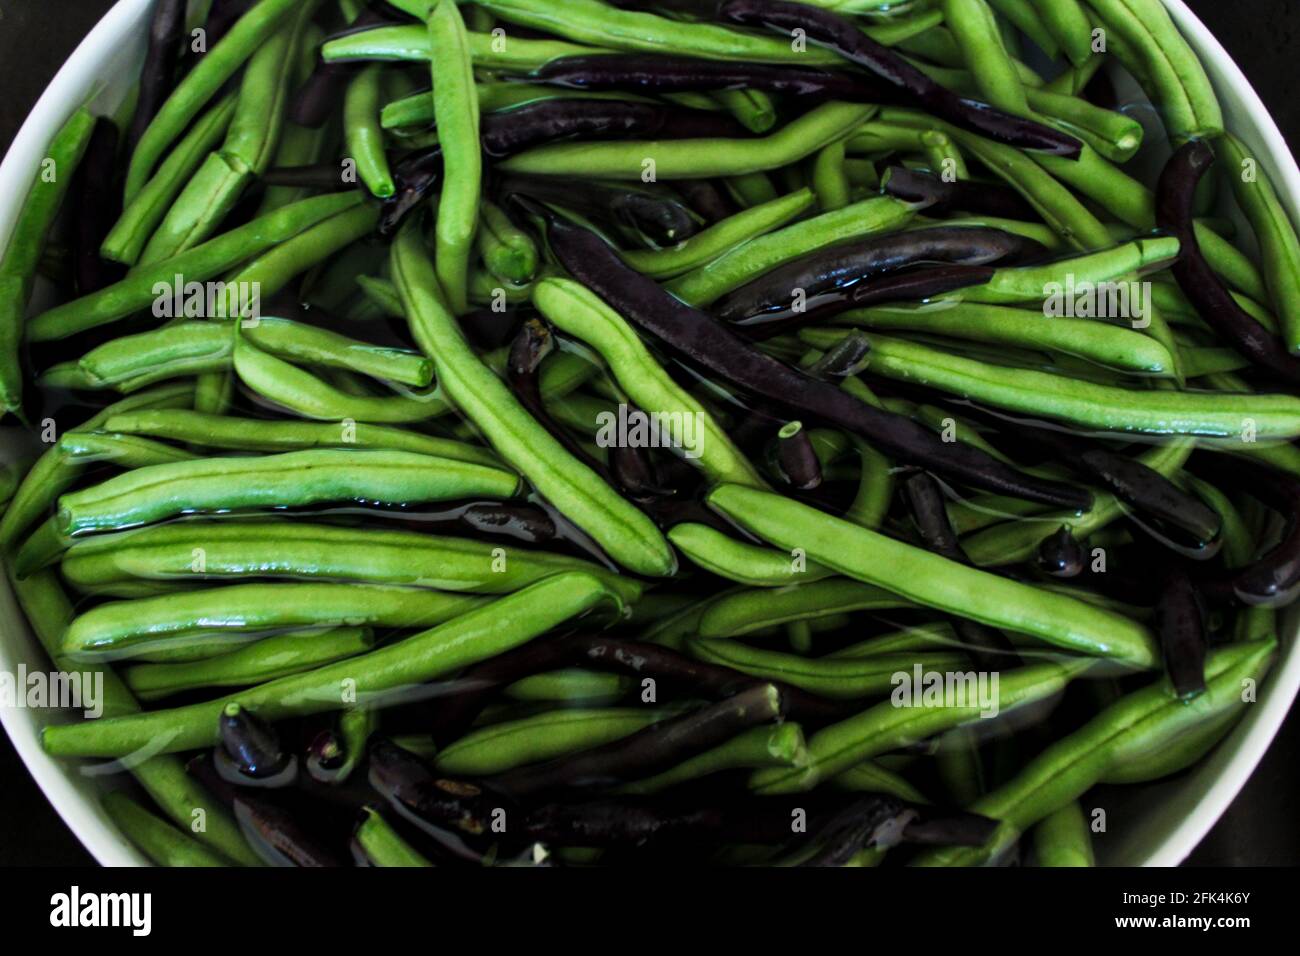 many green and purple beans immersed in water in a white bowl Stock Photo